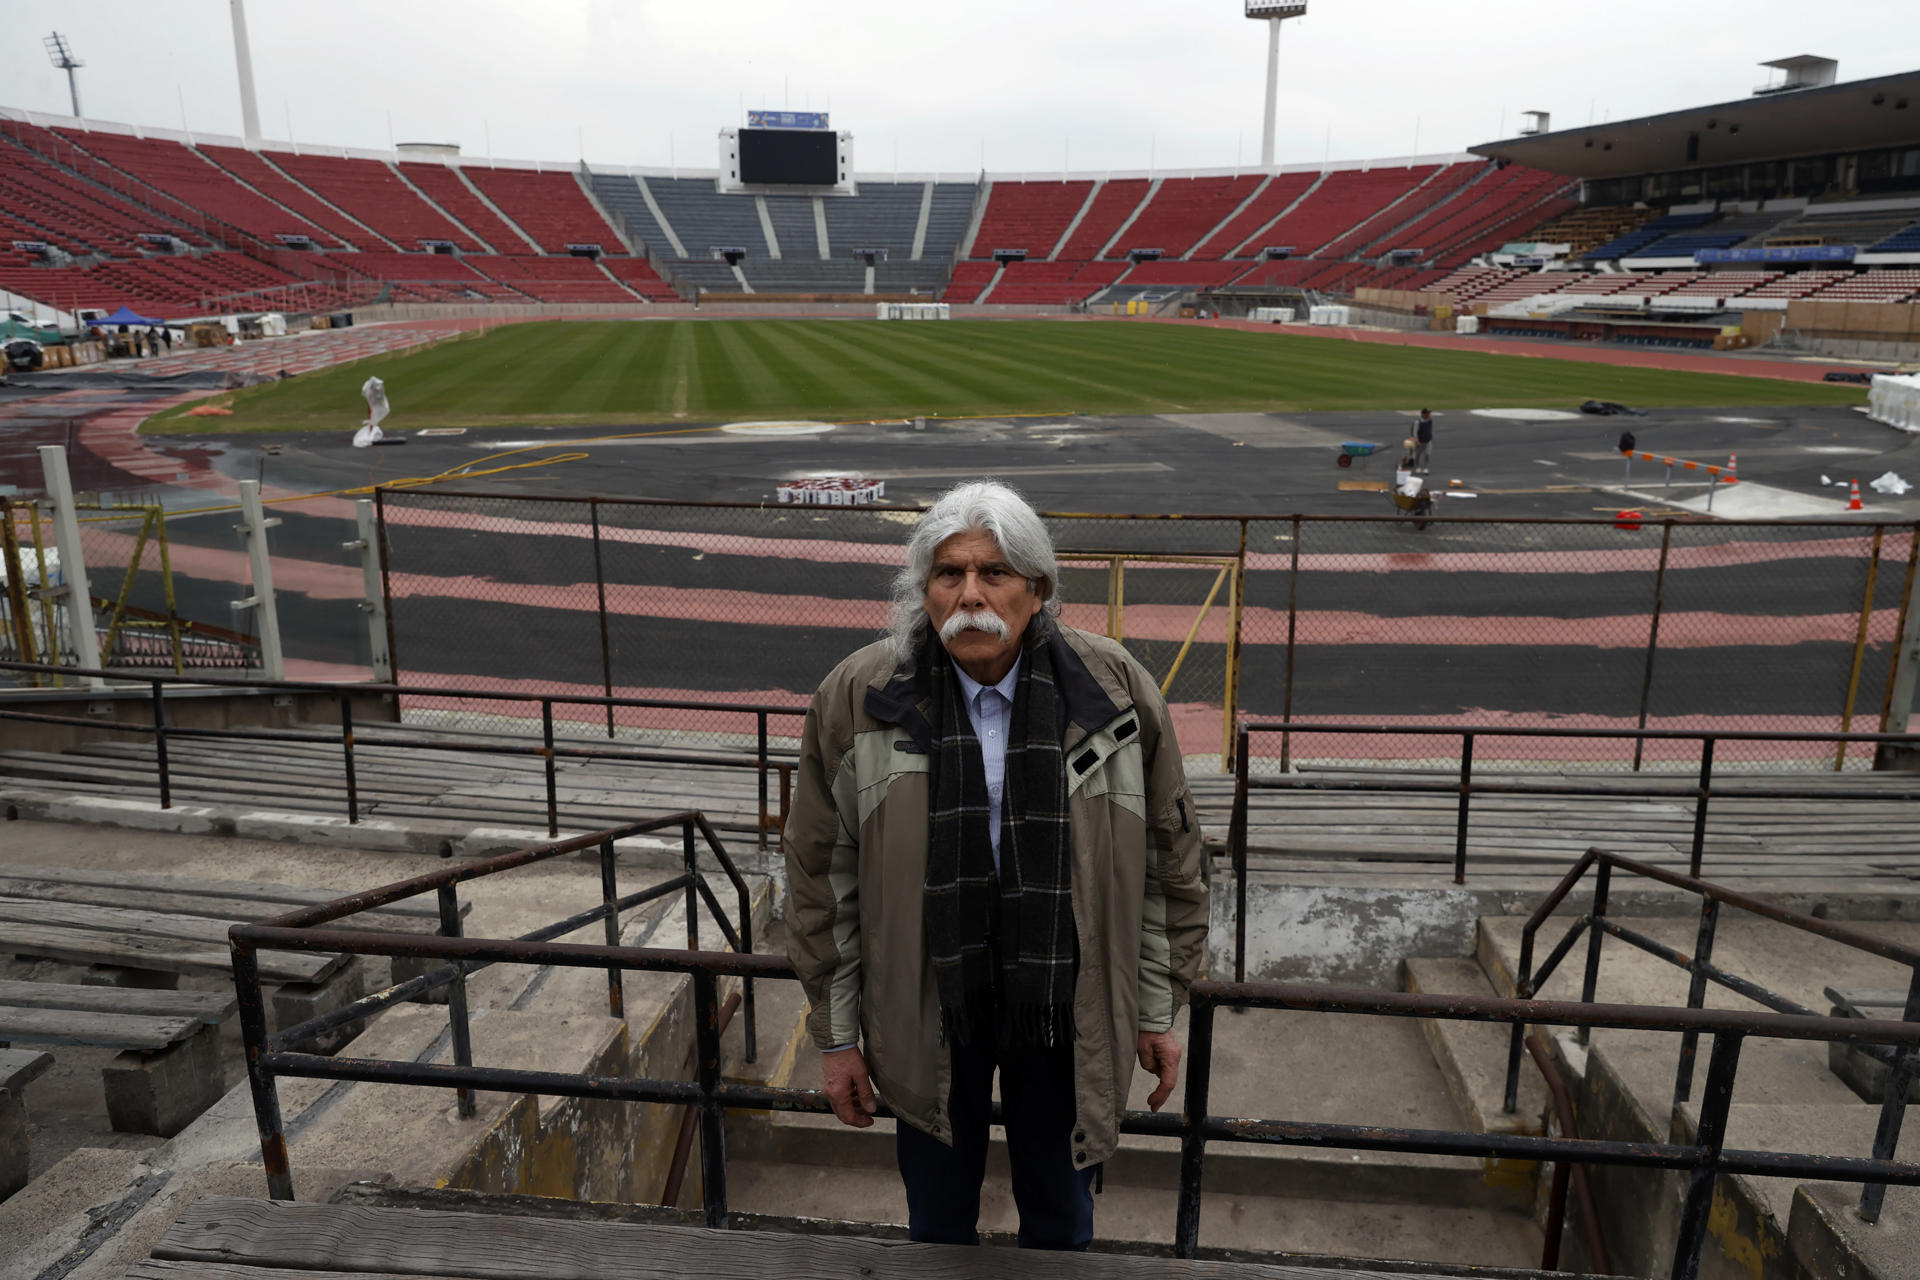 Patricio Sandoval former prisoner during the Chilean dictatorship poses outside the historic site 'Camarin de Mujeres' at the National Stadium in Santiago de Chile, Chile, 2 September 2023 (issued 3 September 2023).  EFE/ Elvis González